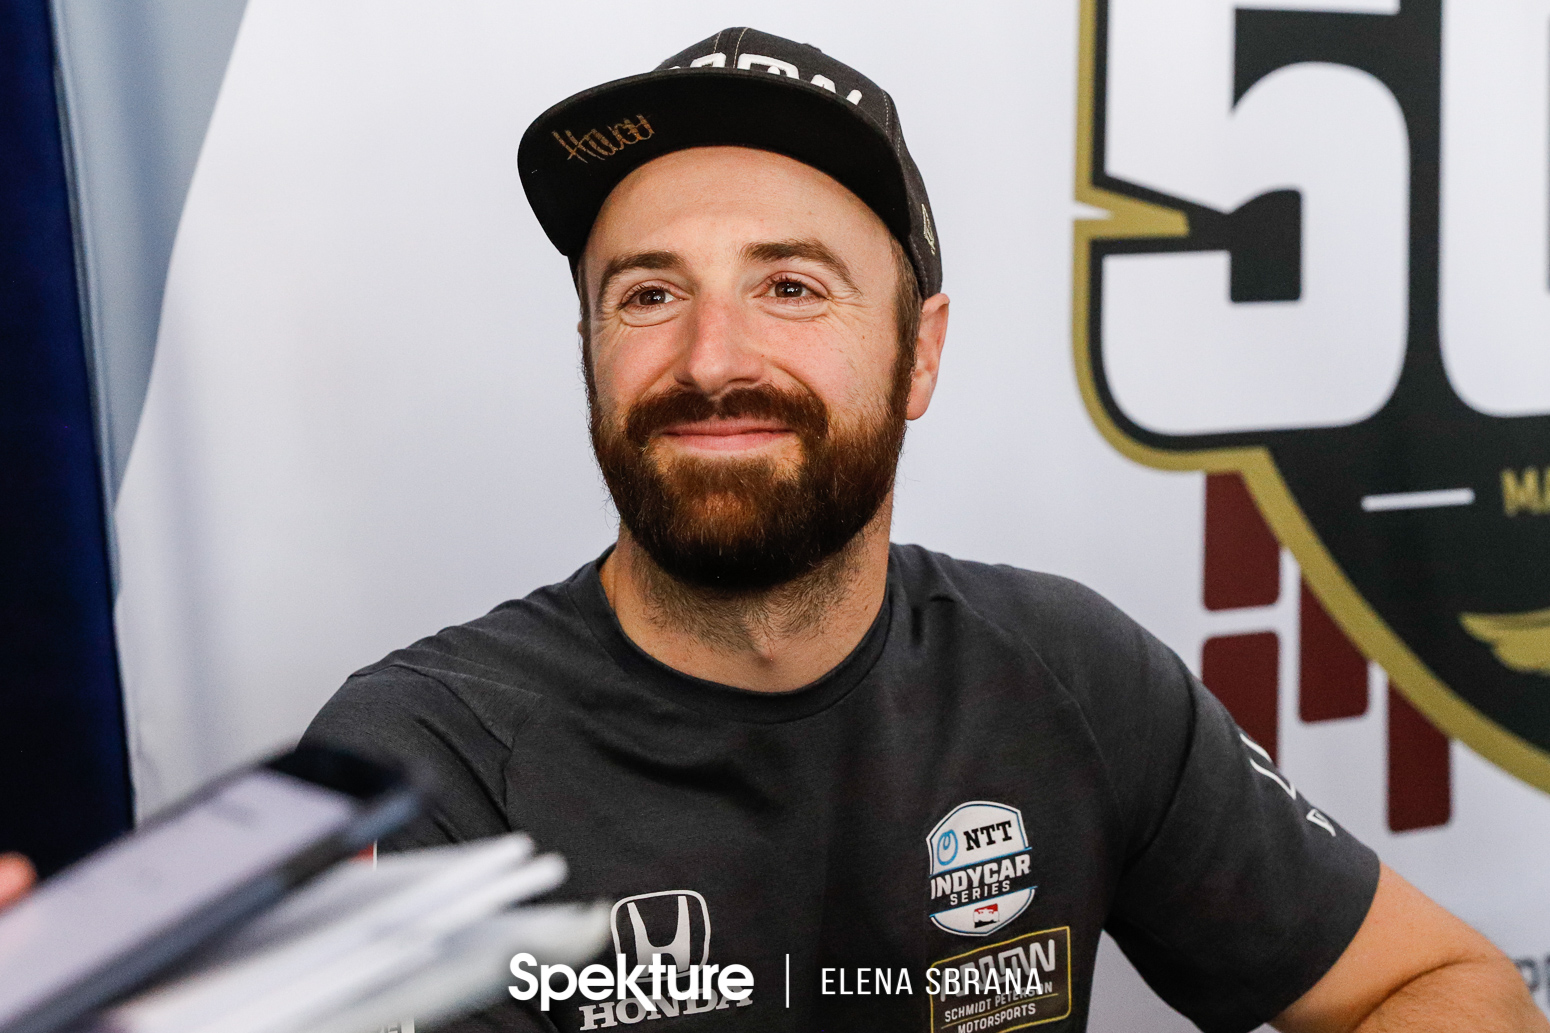 Earchphoto Sports - James Hinchcliffe during media day at IMS